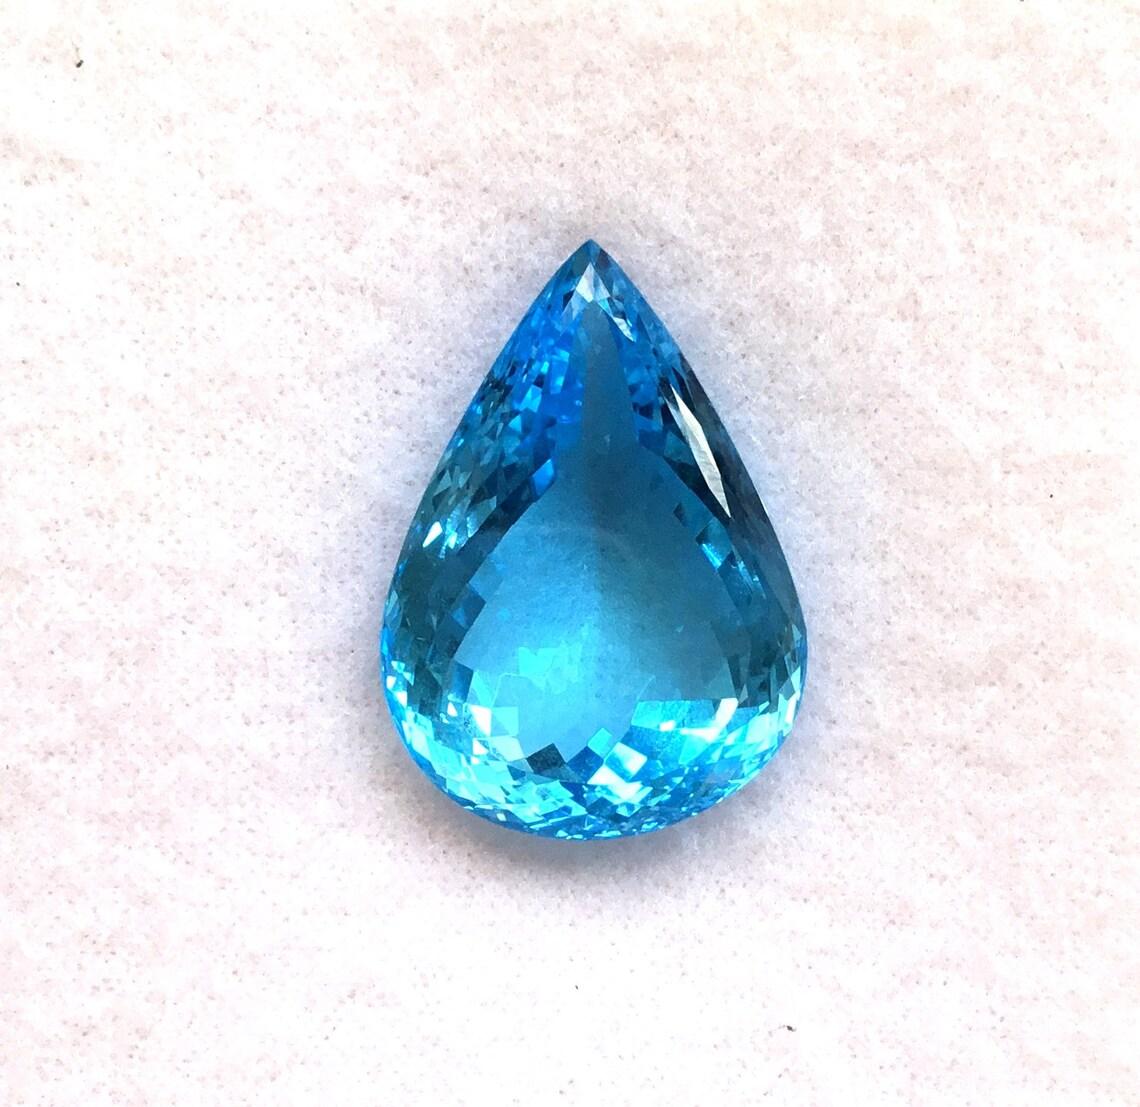 Blue Topaz Pear Shape
1 piece
115.50 Ct Weight
27x38 mm Size
